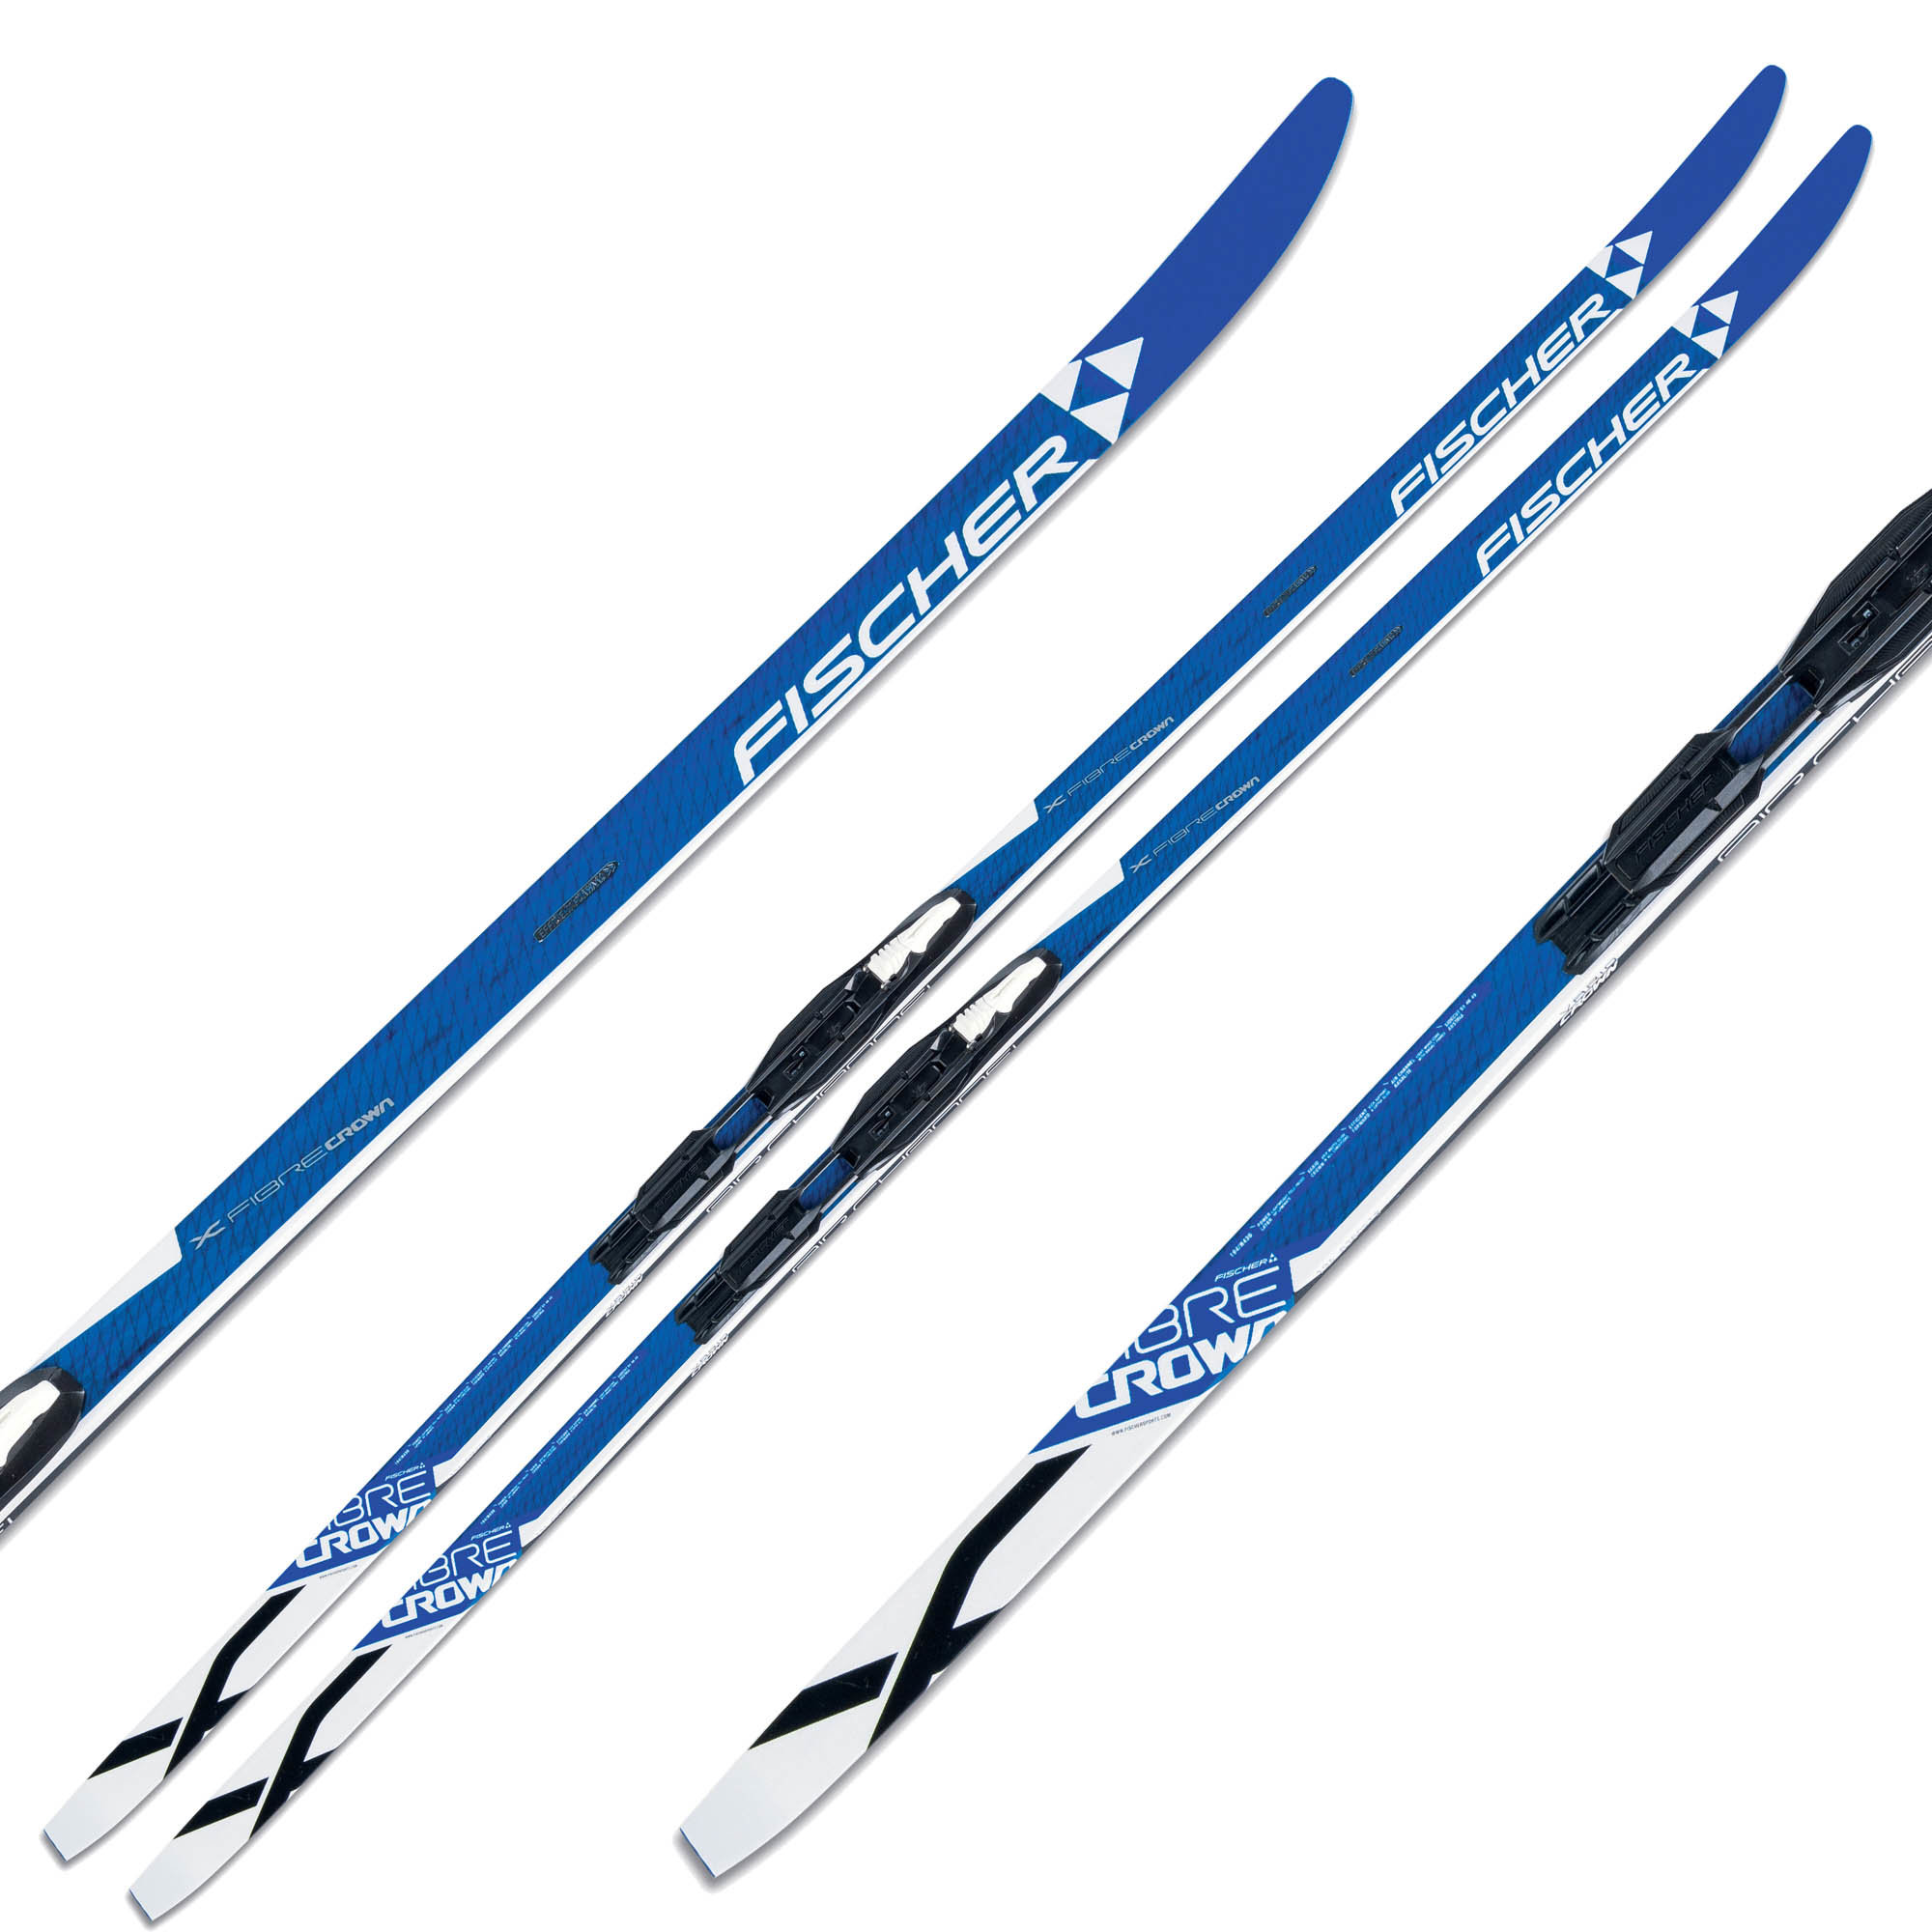 The 9 Best Cross-Country Skis for 2022 7